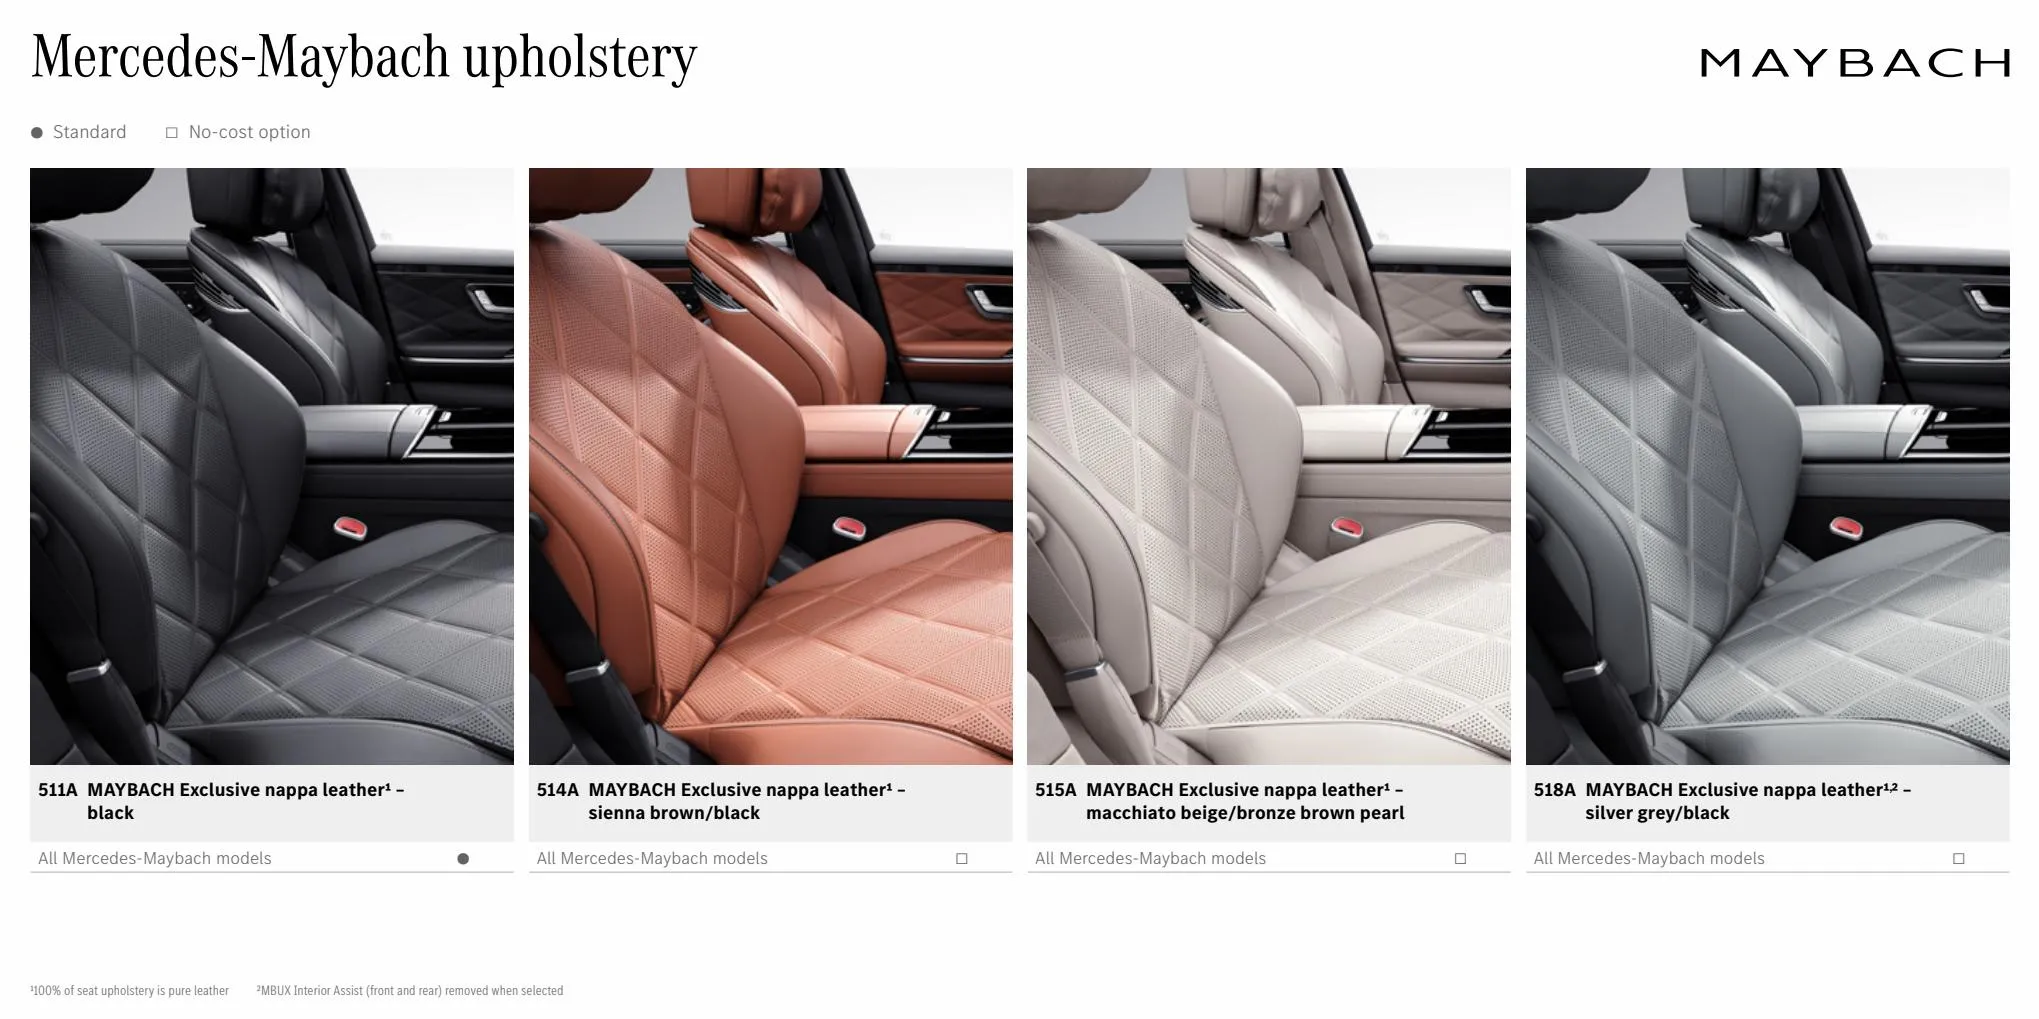 Catalogue The S-Class and Mercedes-Maybach S-Class, page 00036